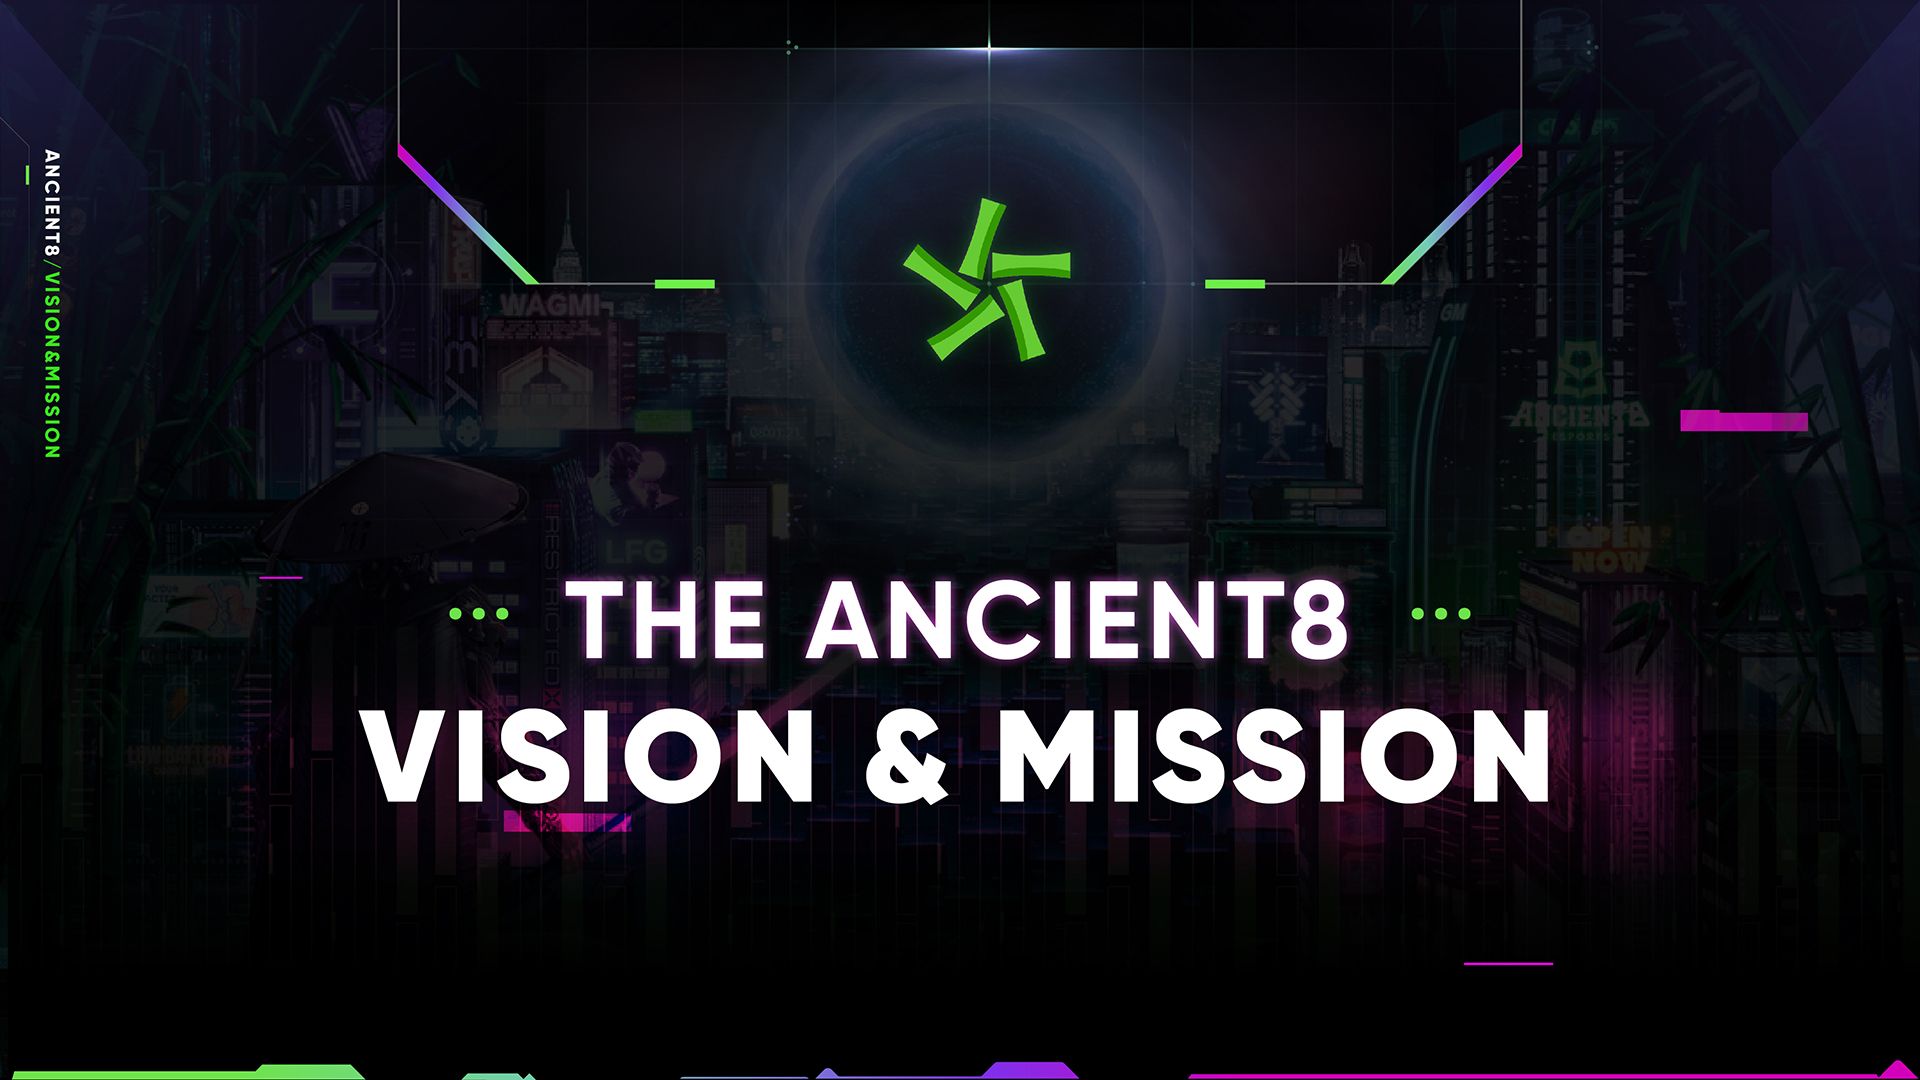 THE ANCIENT8 VISION & MISSION